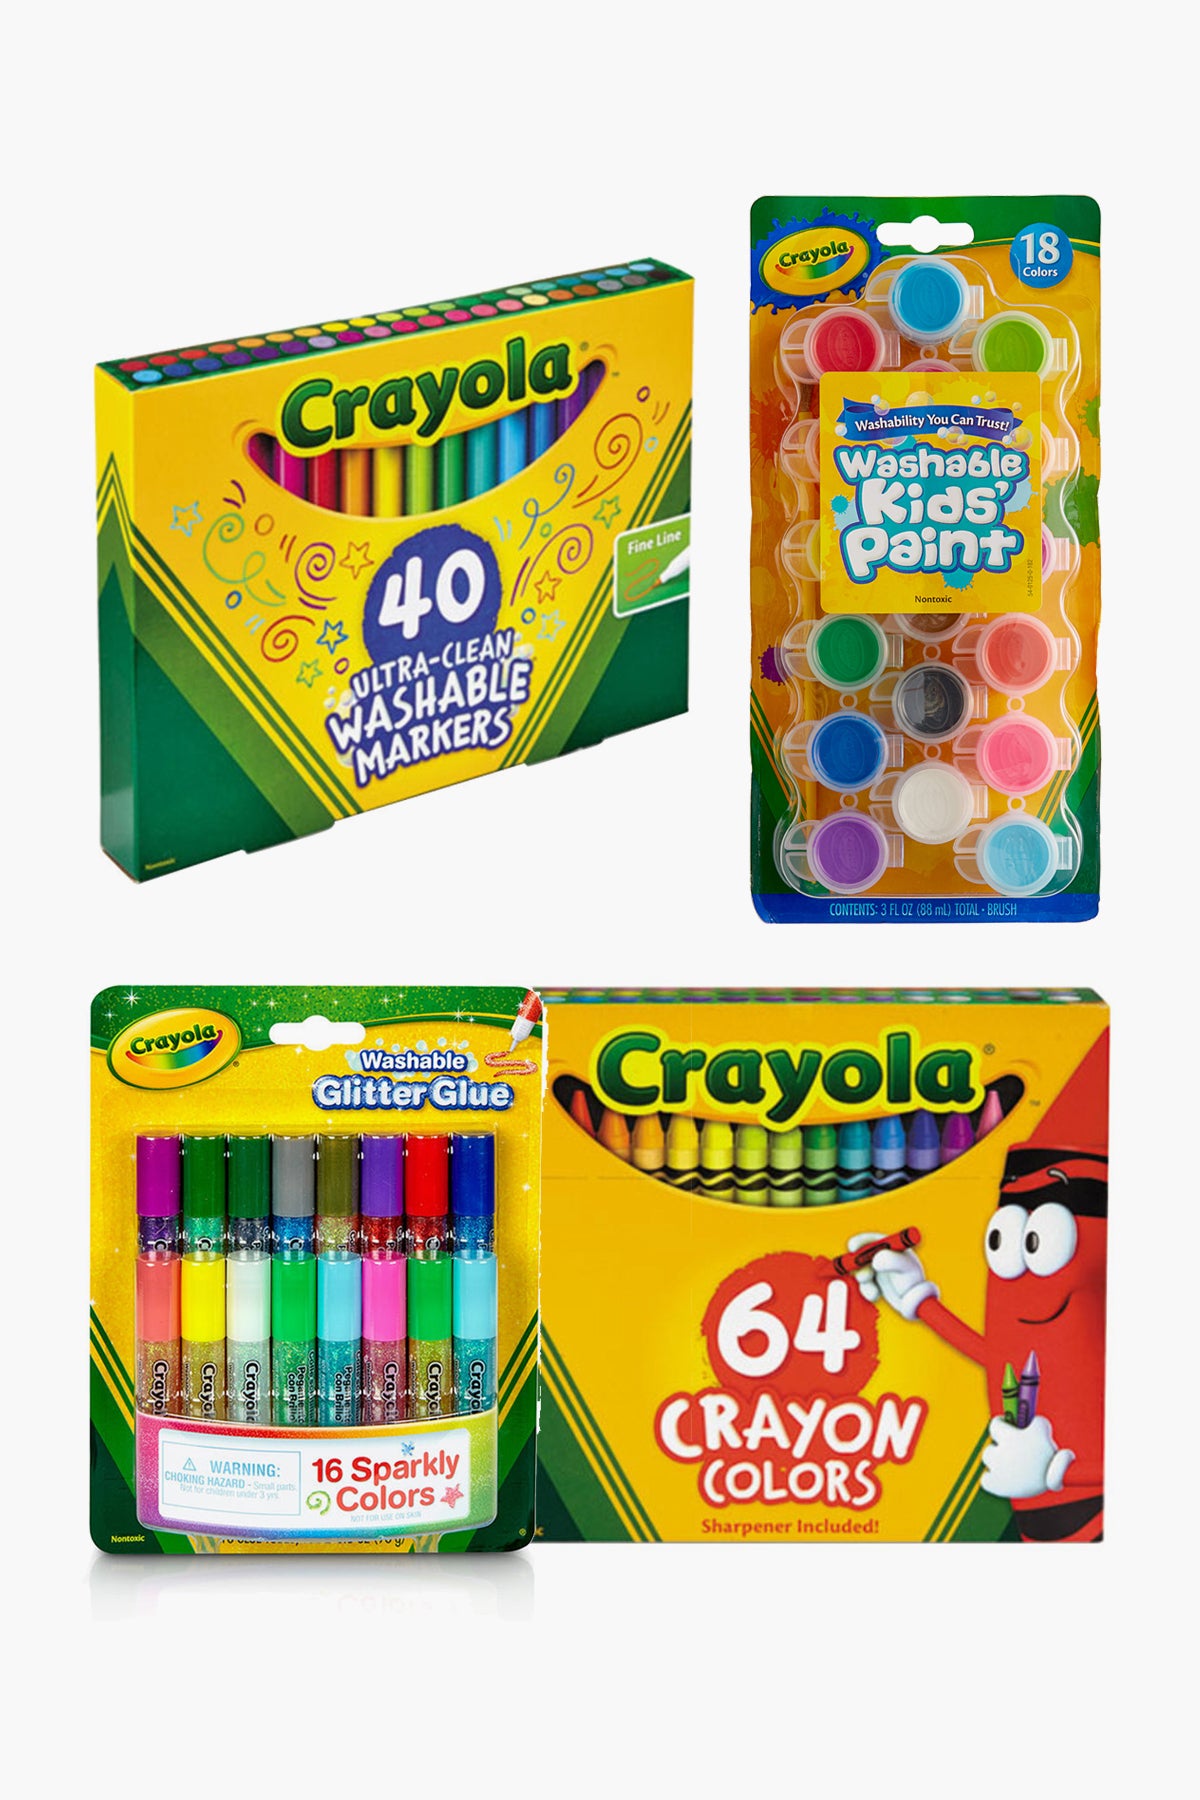 Crayola All-in-One Portable Art Studio for $9.99 (reg. $14.99